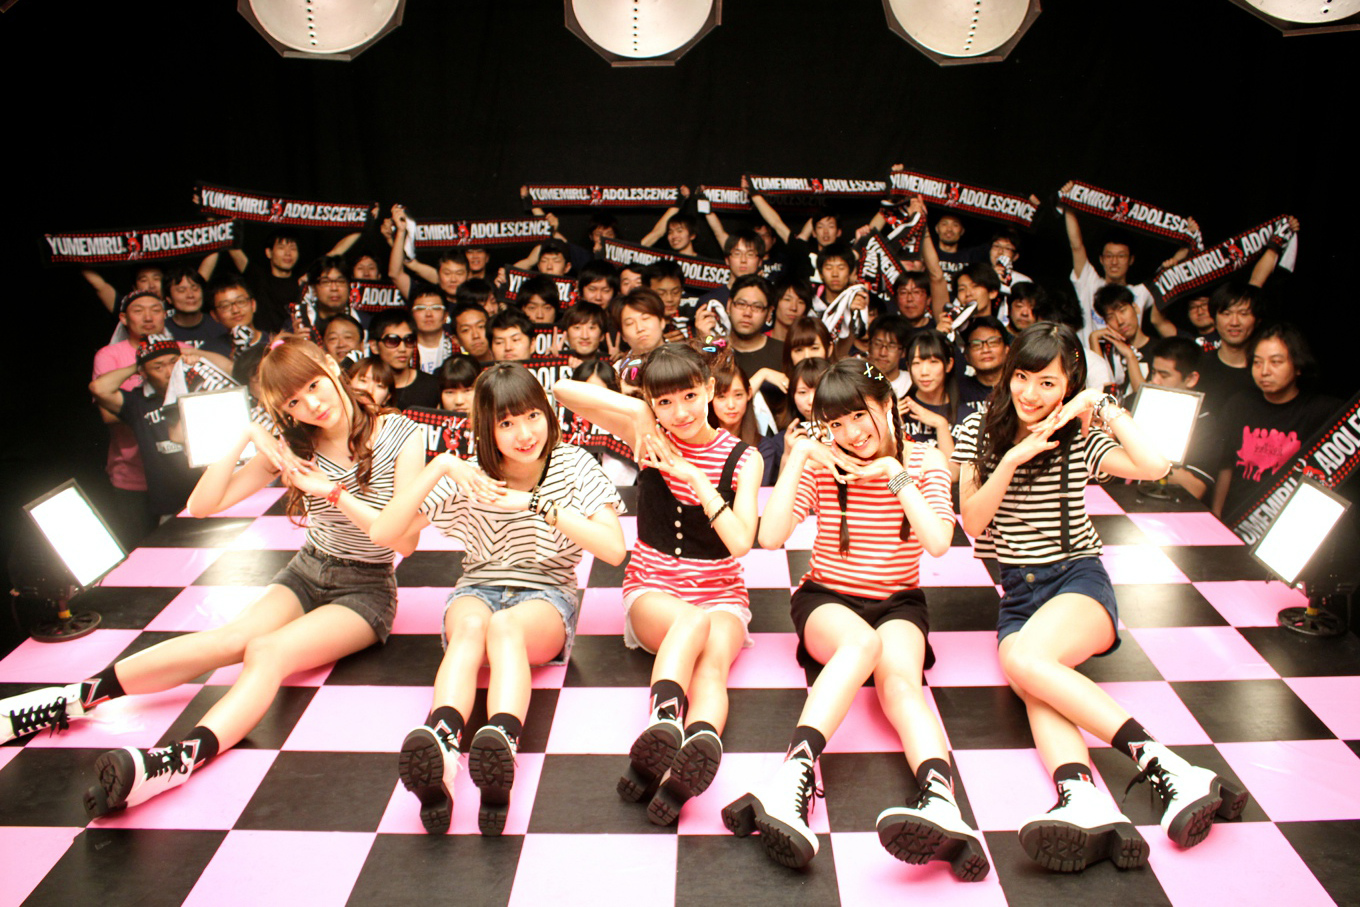 Yumemiru Adolescence’s MV for “JUMP!”, created with the help of fans, is finally complete!